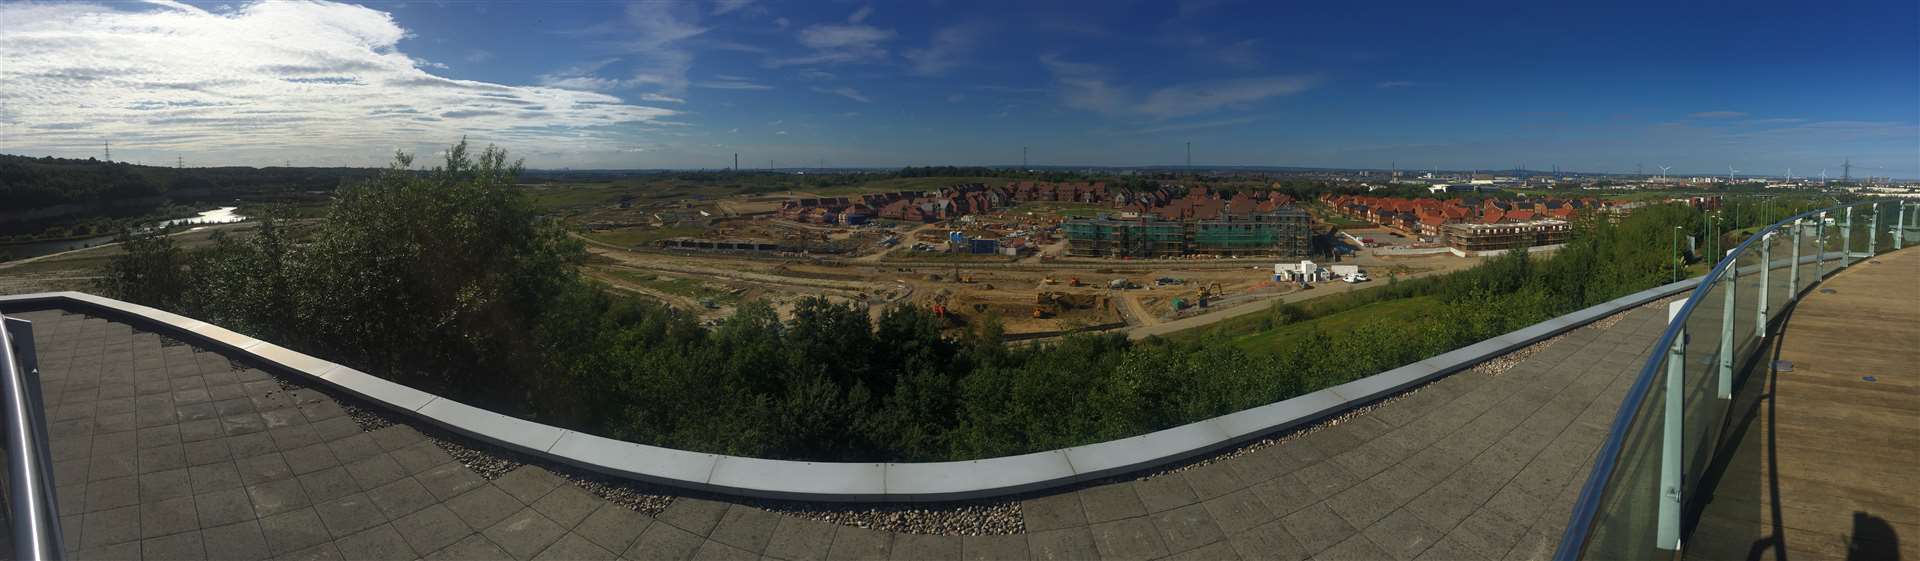 A panoramic view of Castle Hill in Ebbsfleet